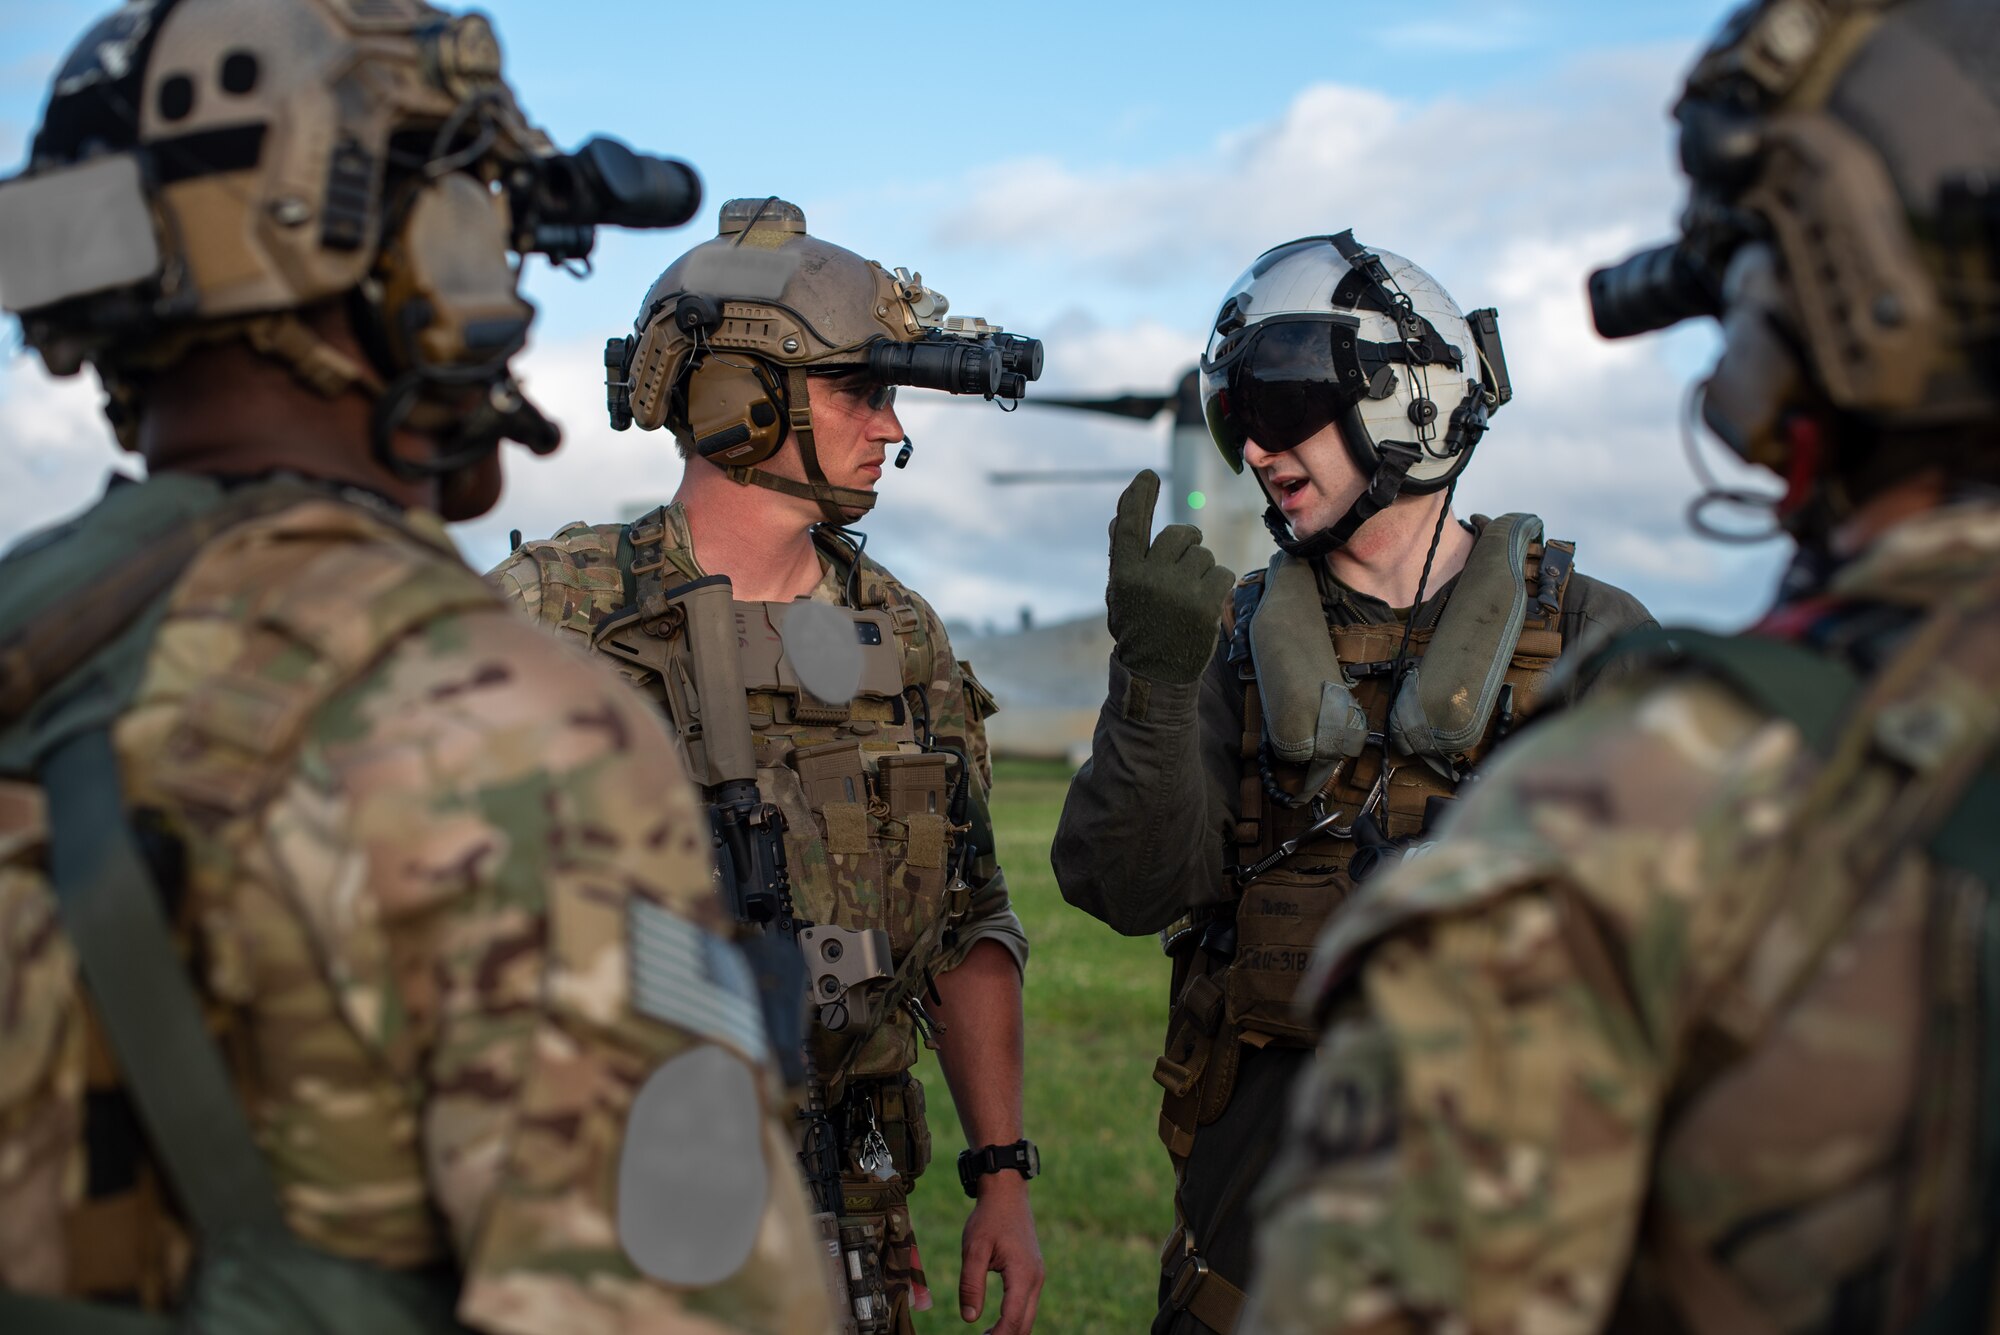 Soldier and Marine prepare to board a helicopter.